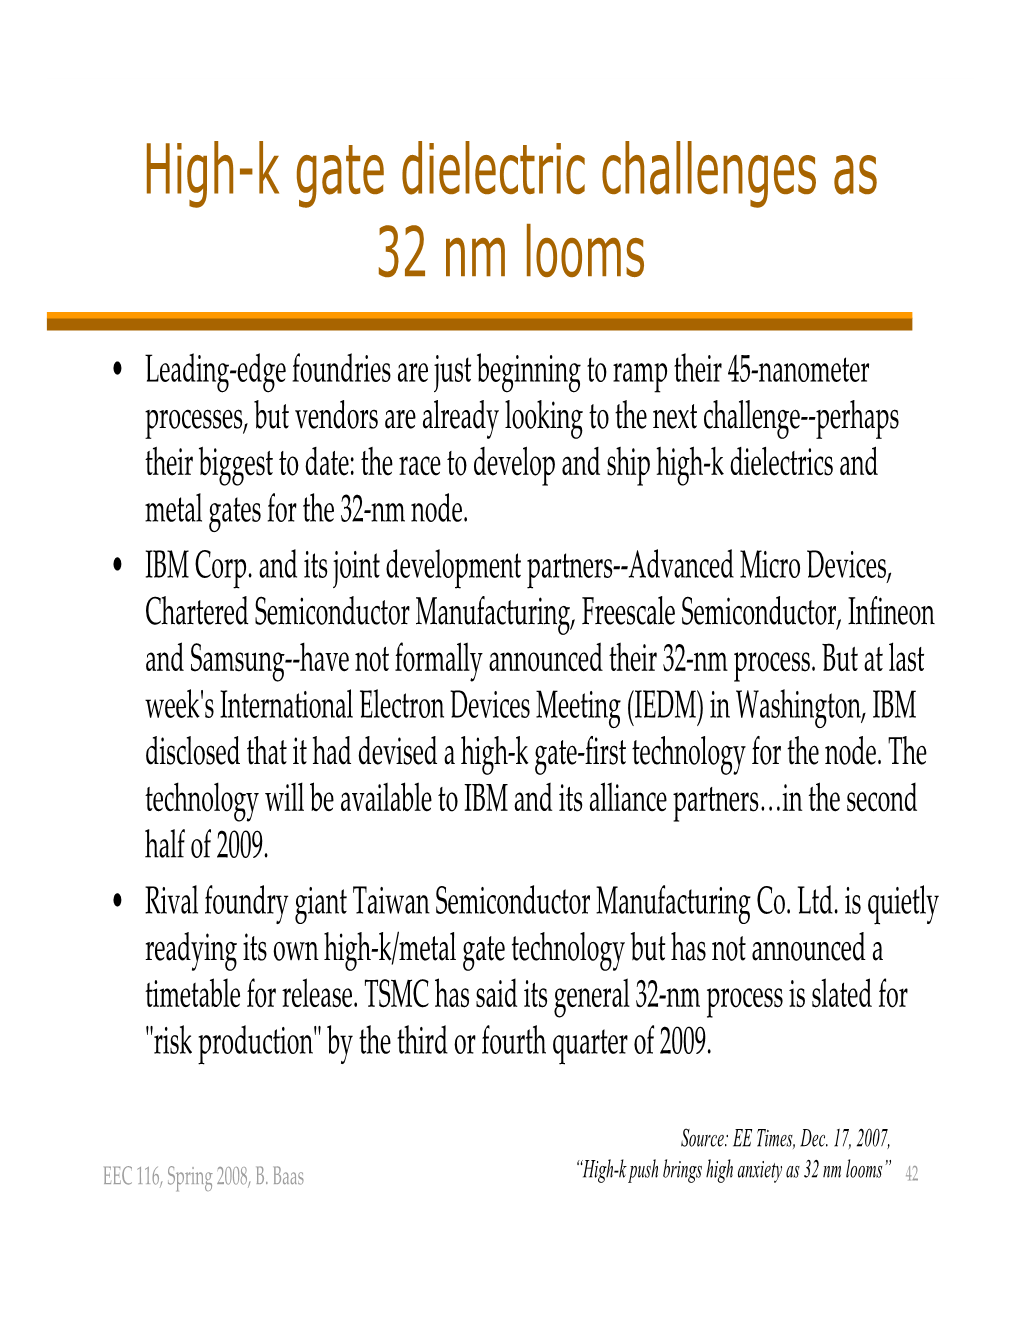 High-K Gate Dielectric Challenges As 32 Nm Looms